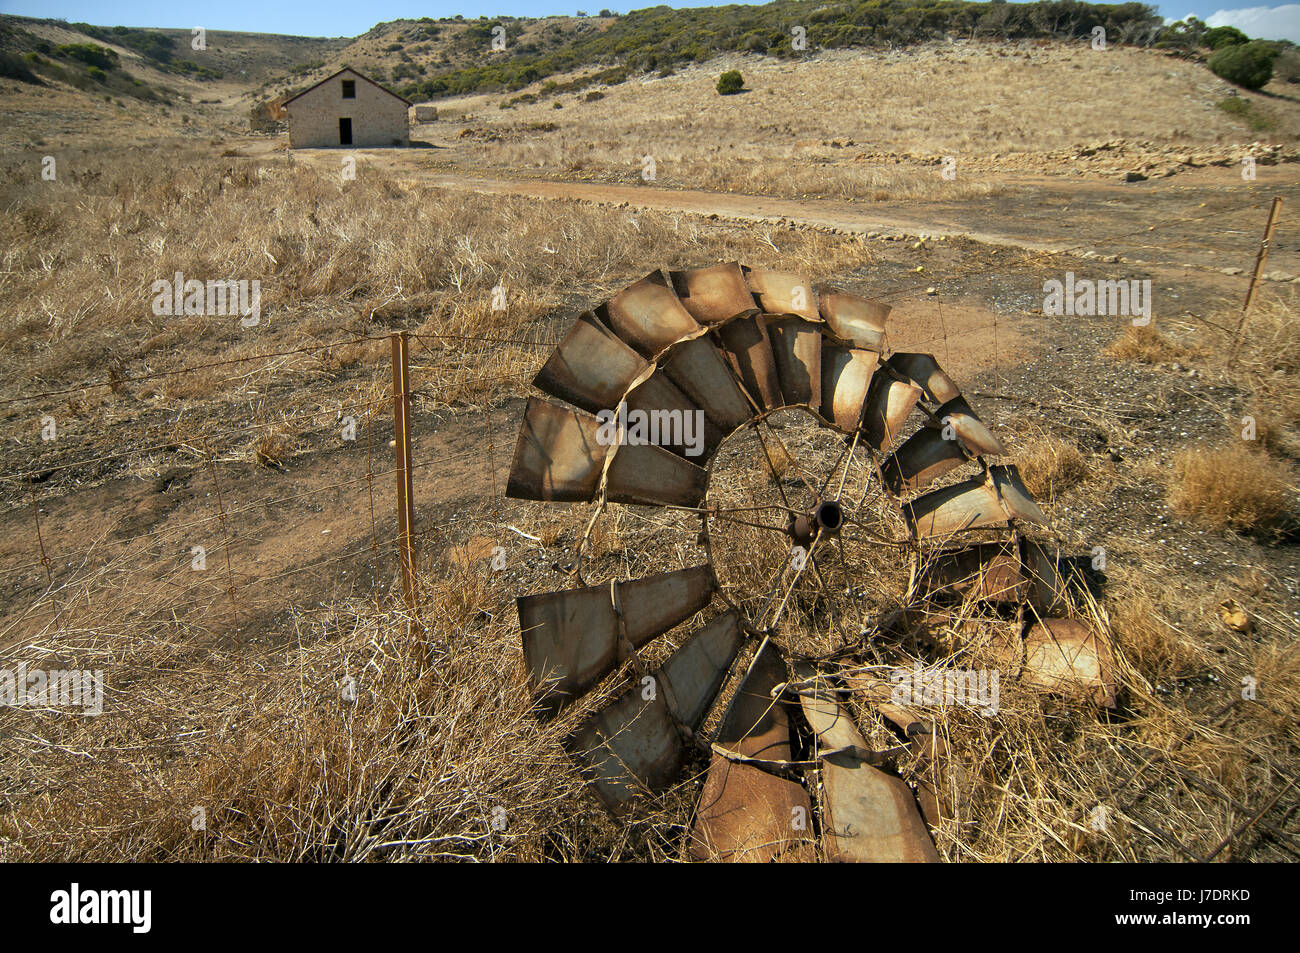 An abandoned Southern Cross windmill lies in the parched grass, in the Kalbarri area of Western Australia. Stock Photo